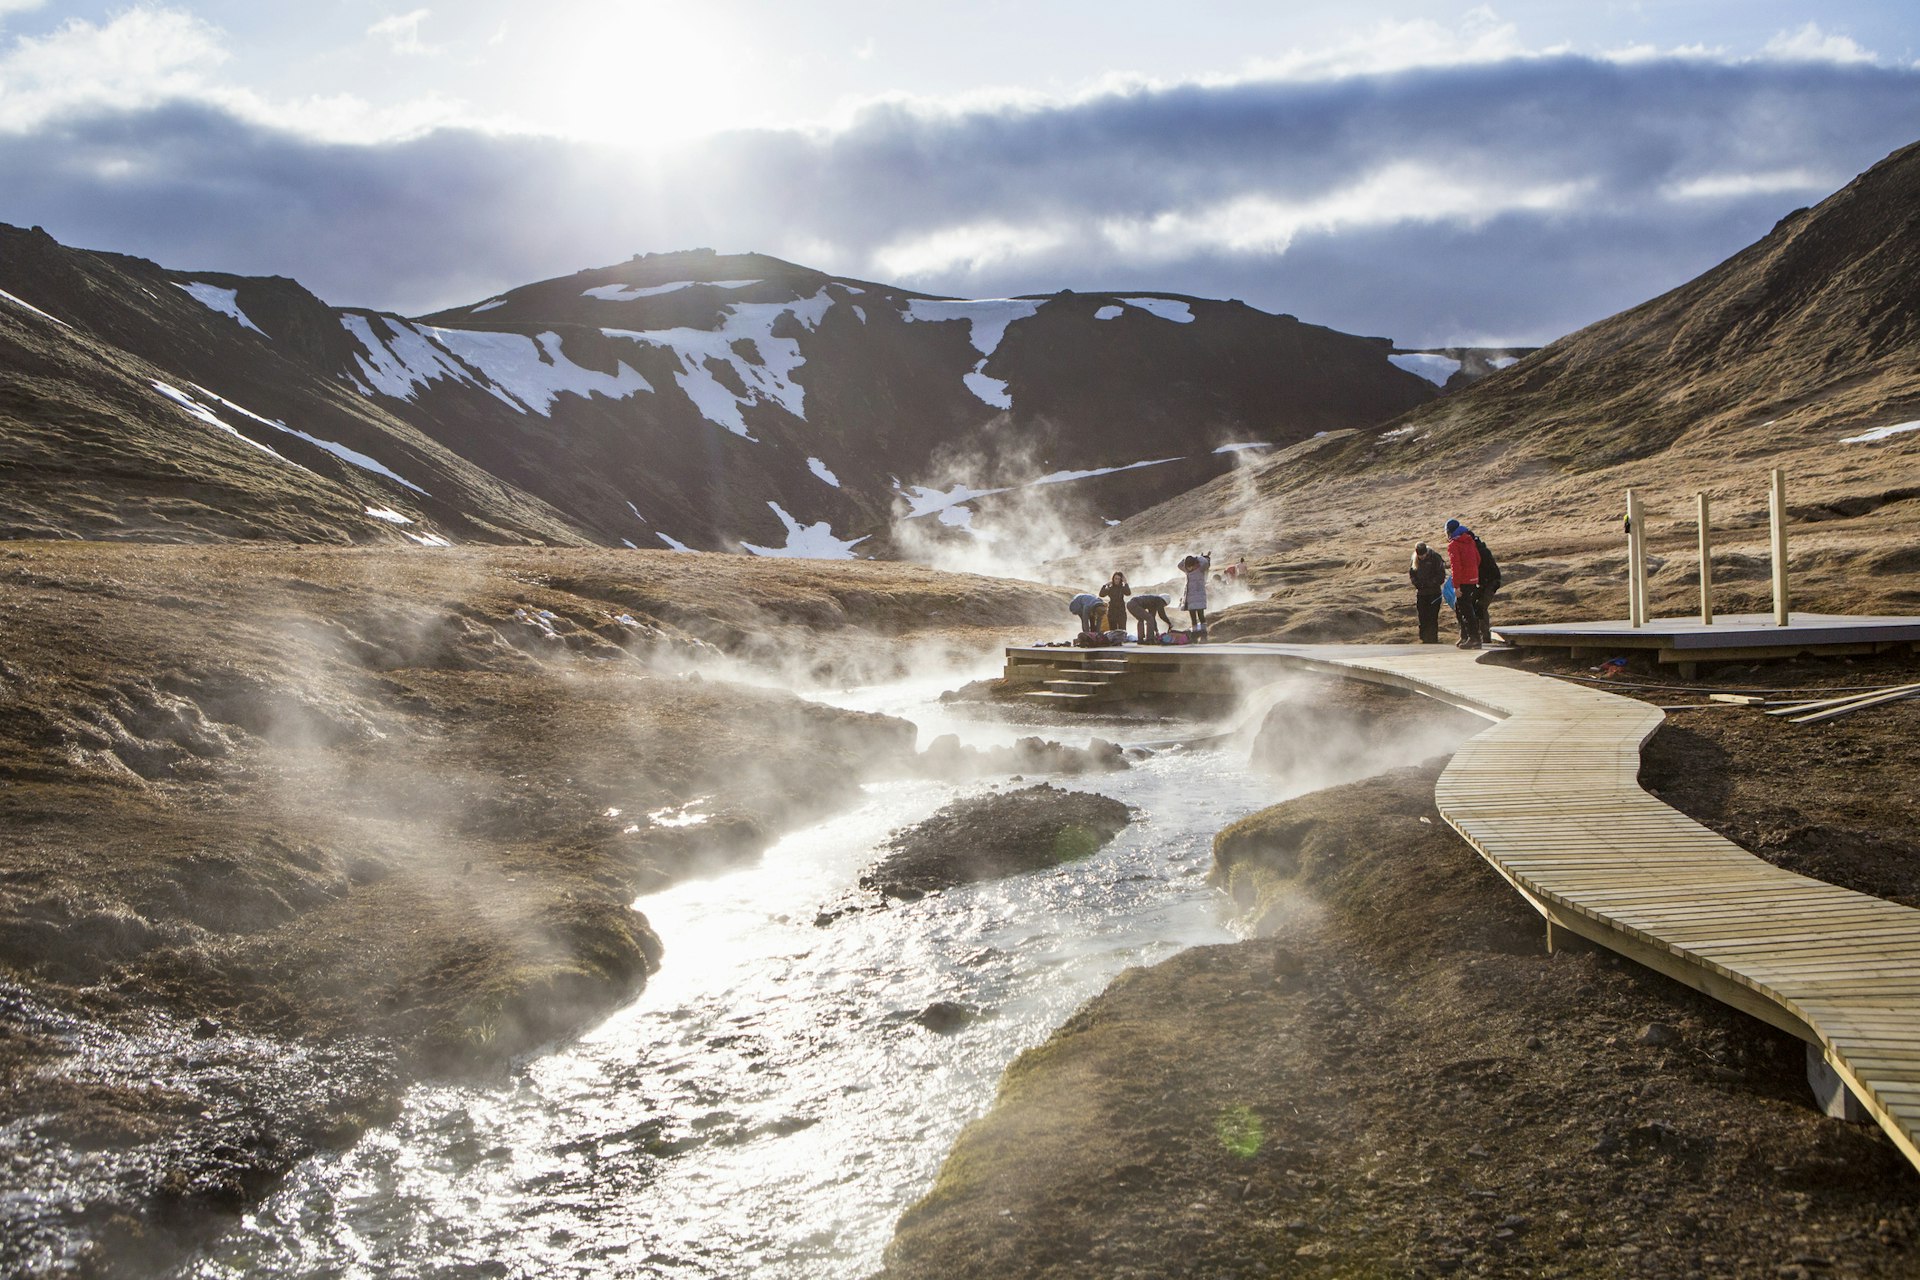 People walk on boardwalks alongside hot springs with steam rising from the water into the cold air